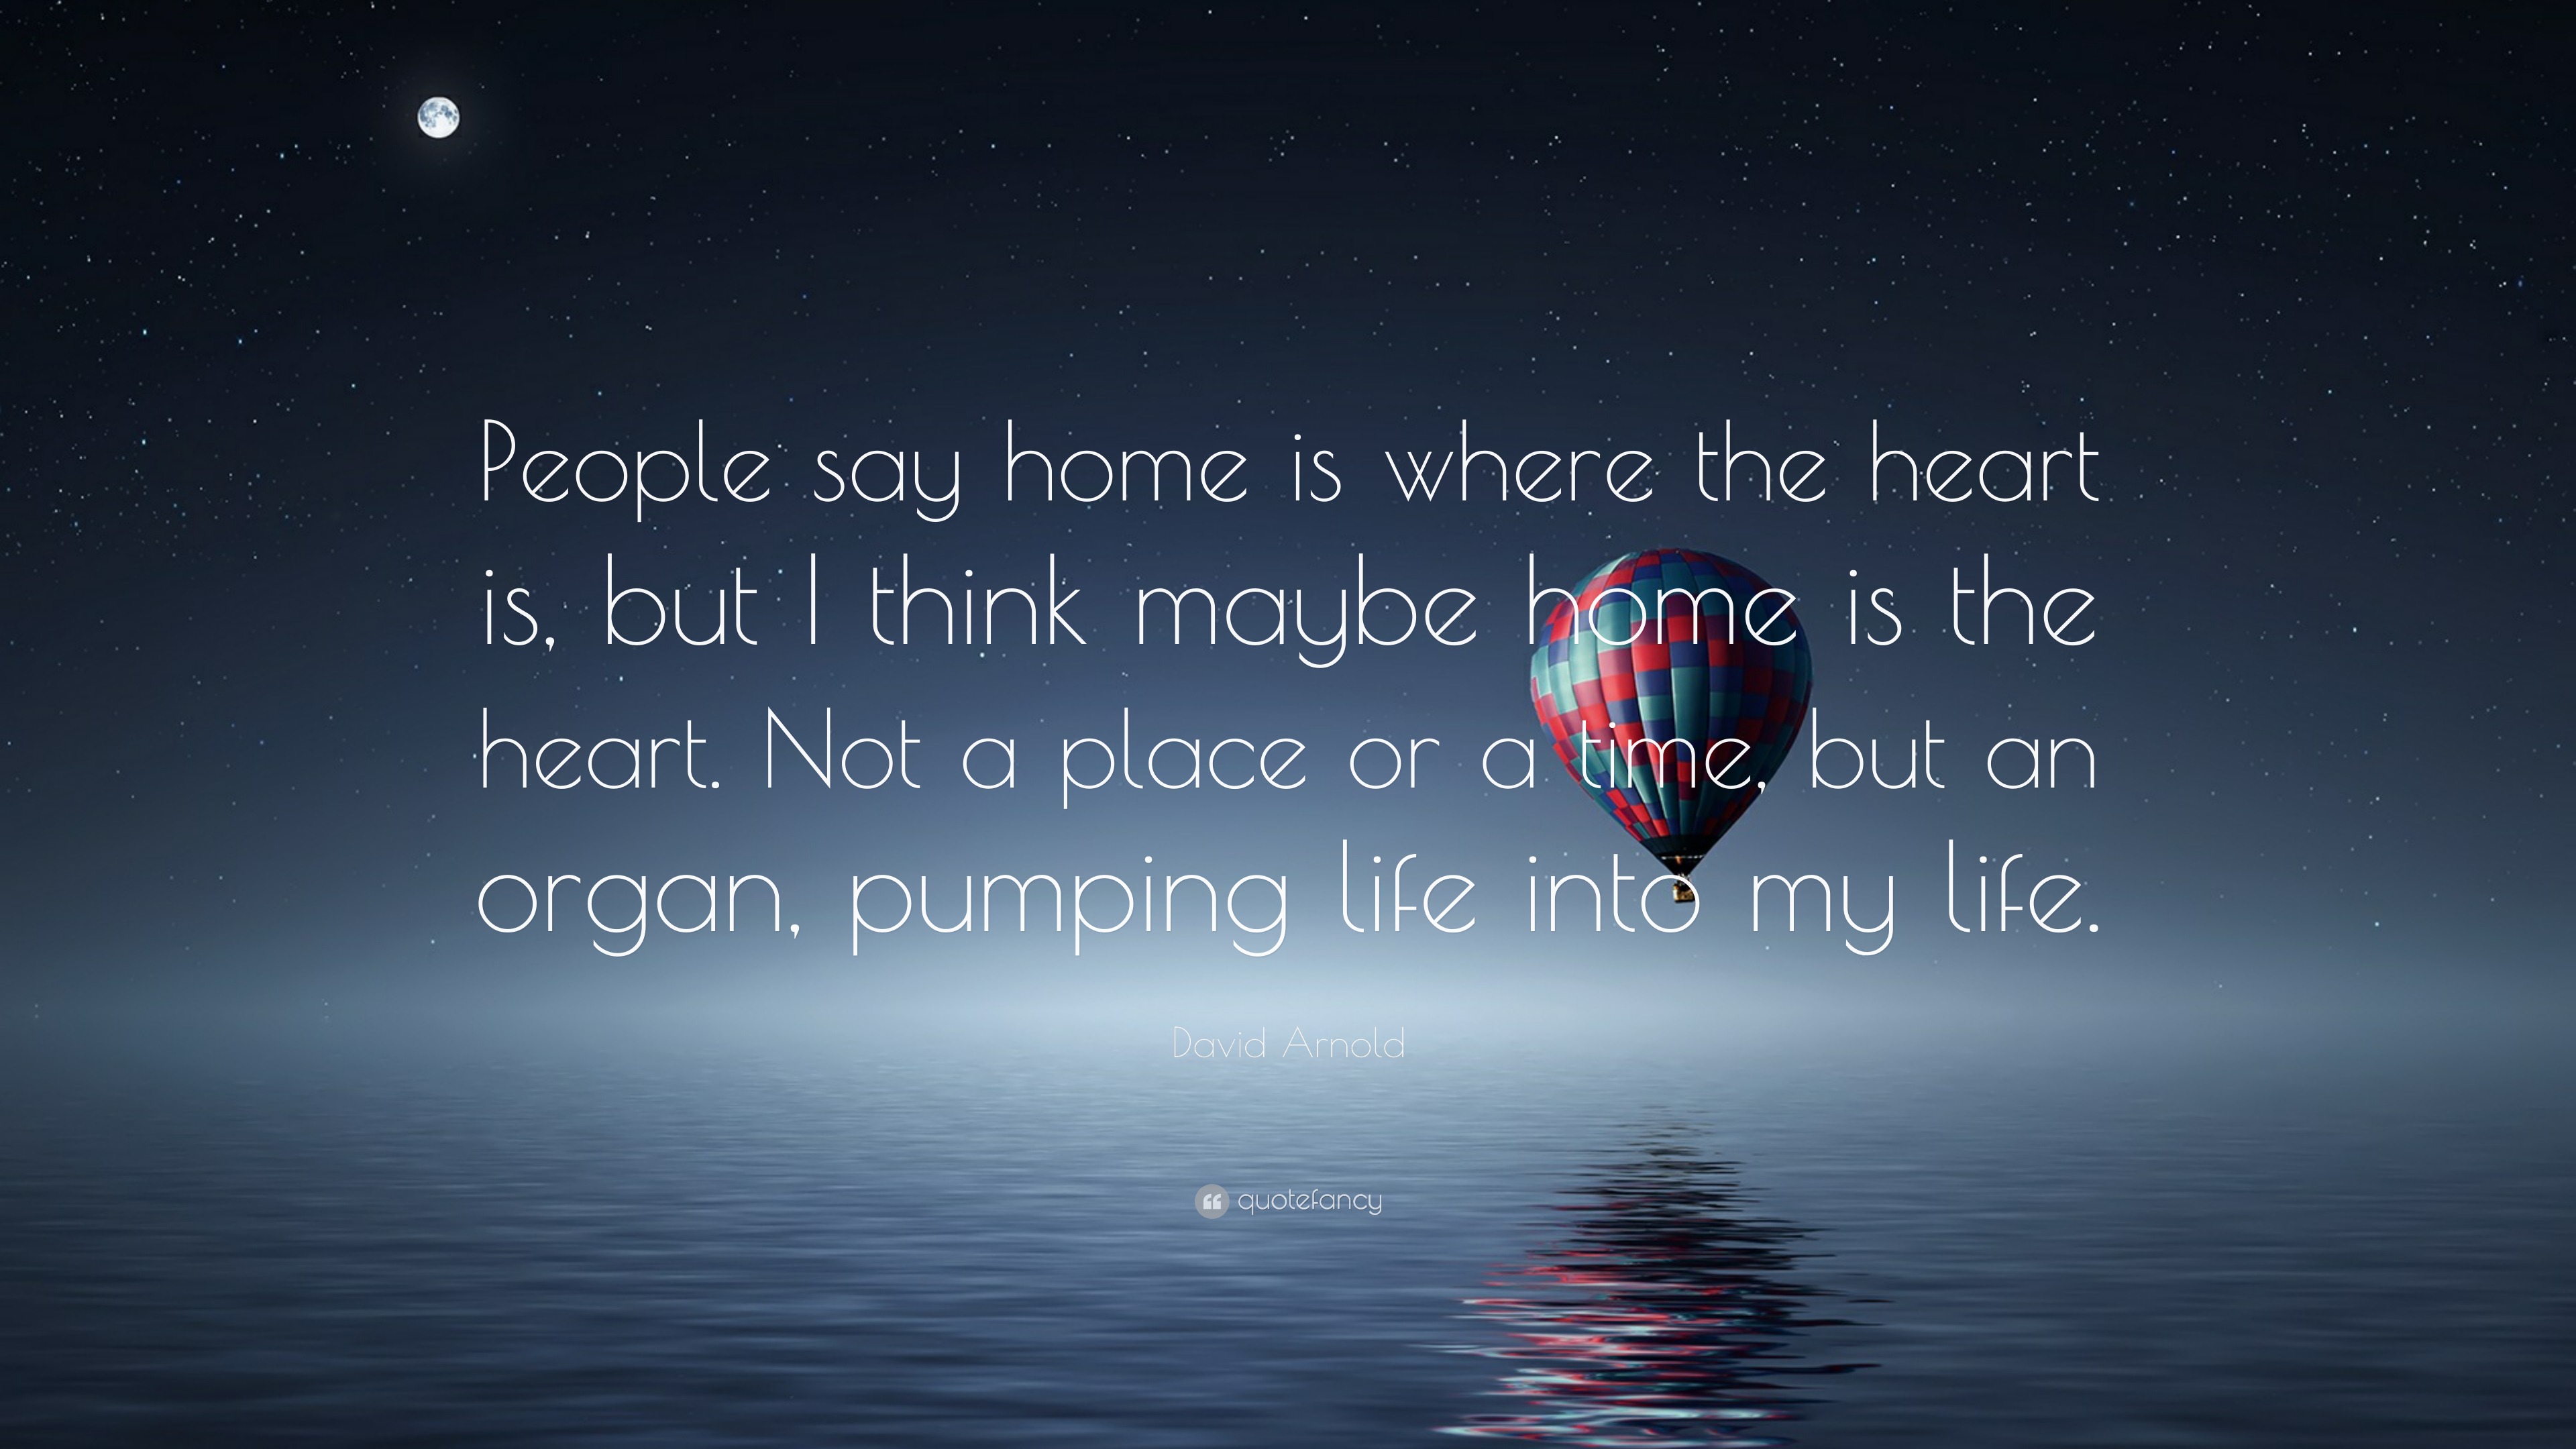 David Arnold Quote: “People say home is where the heart is, but I